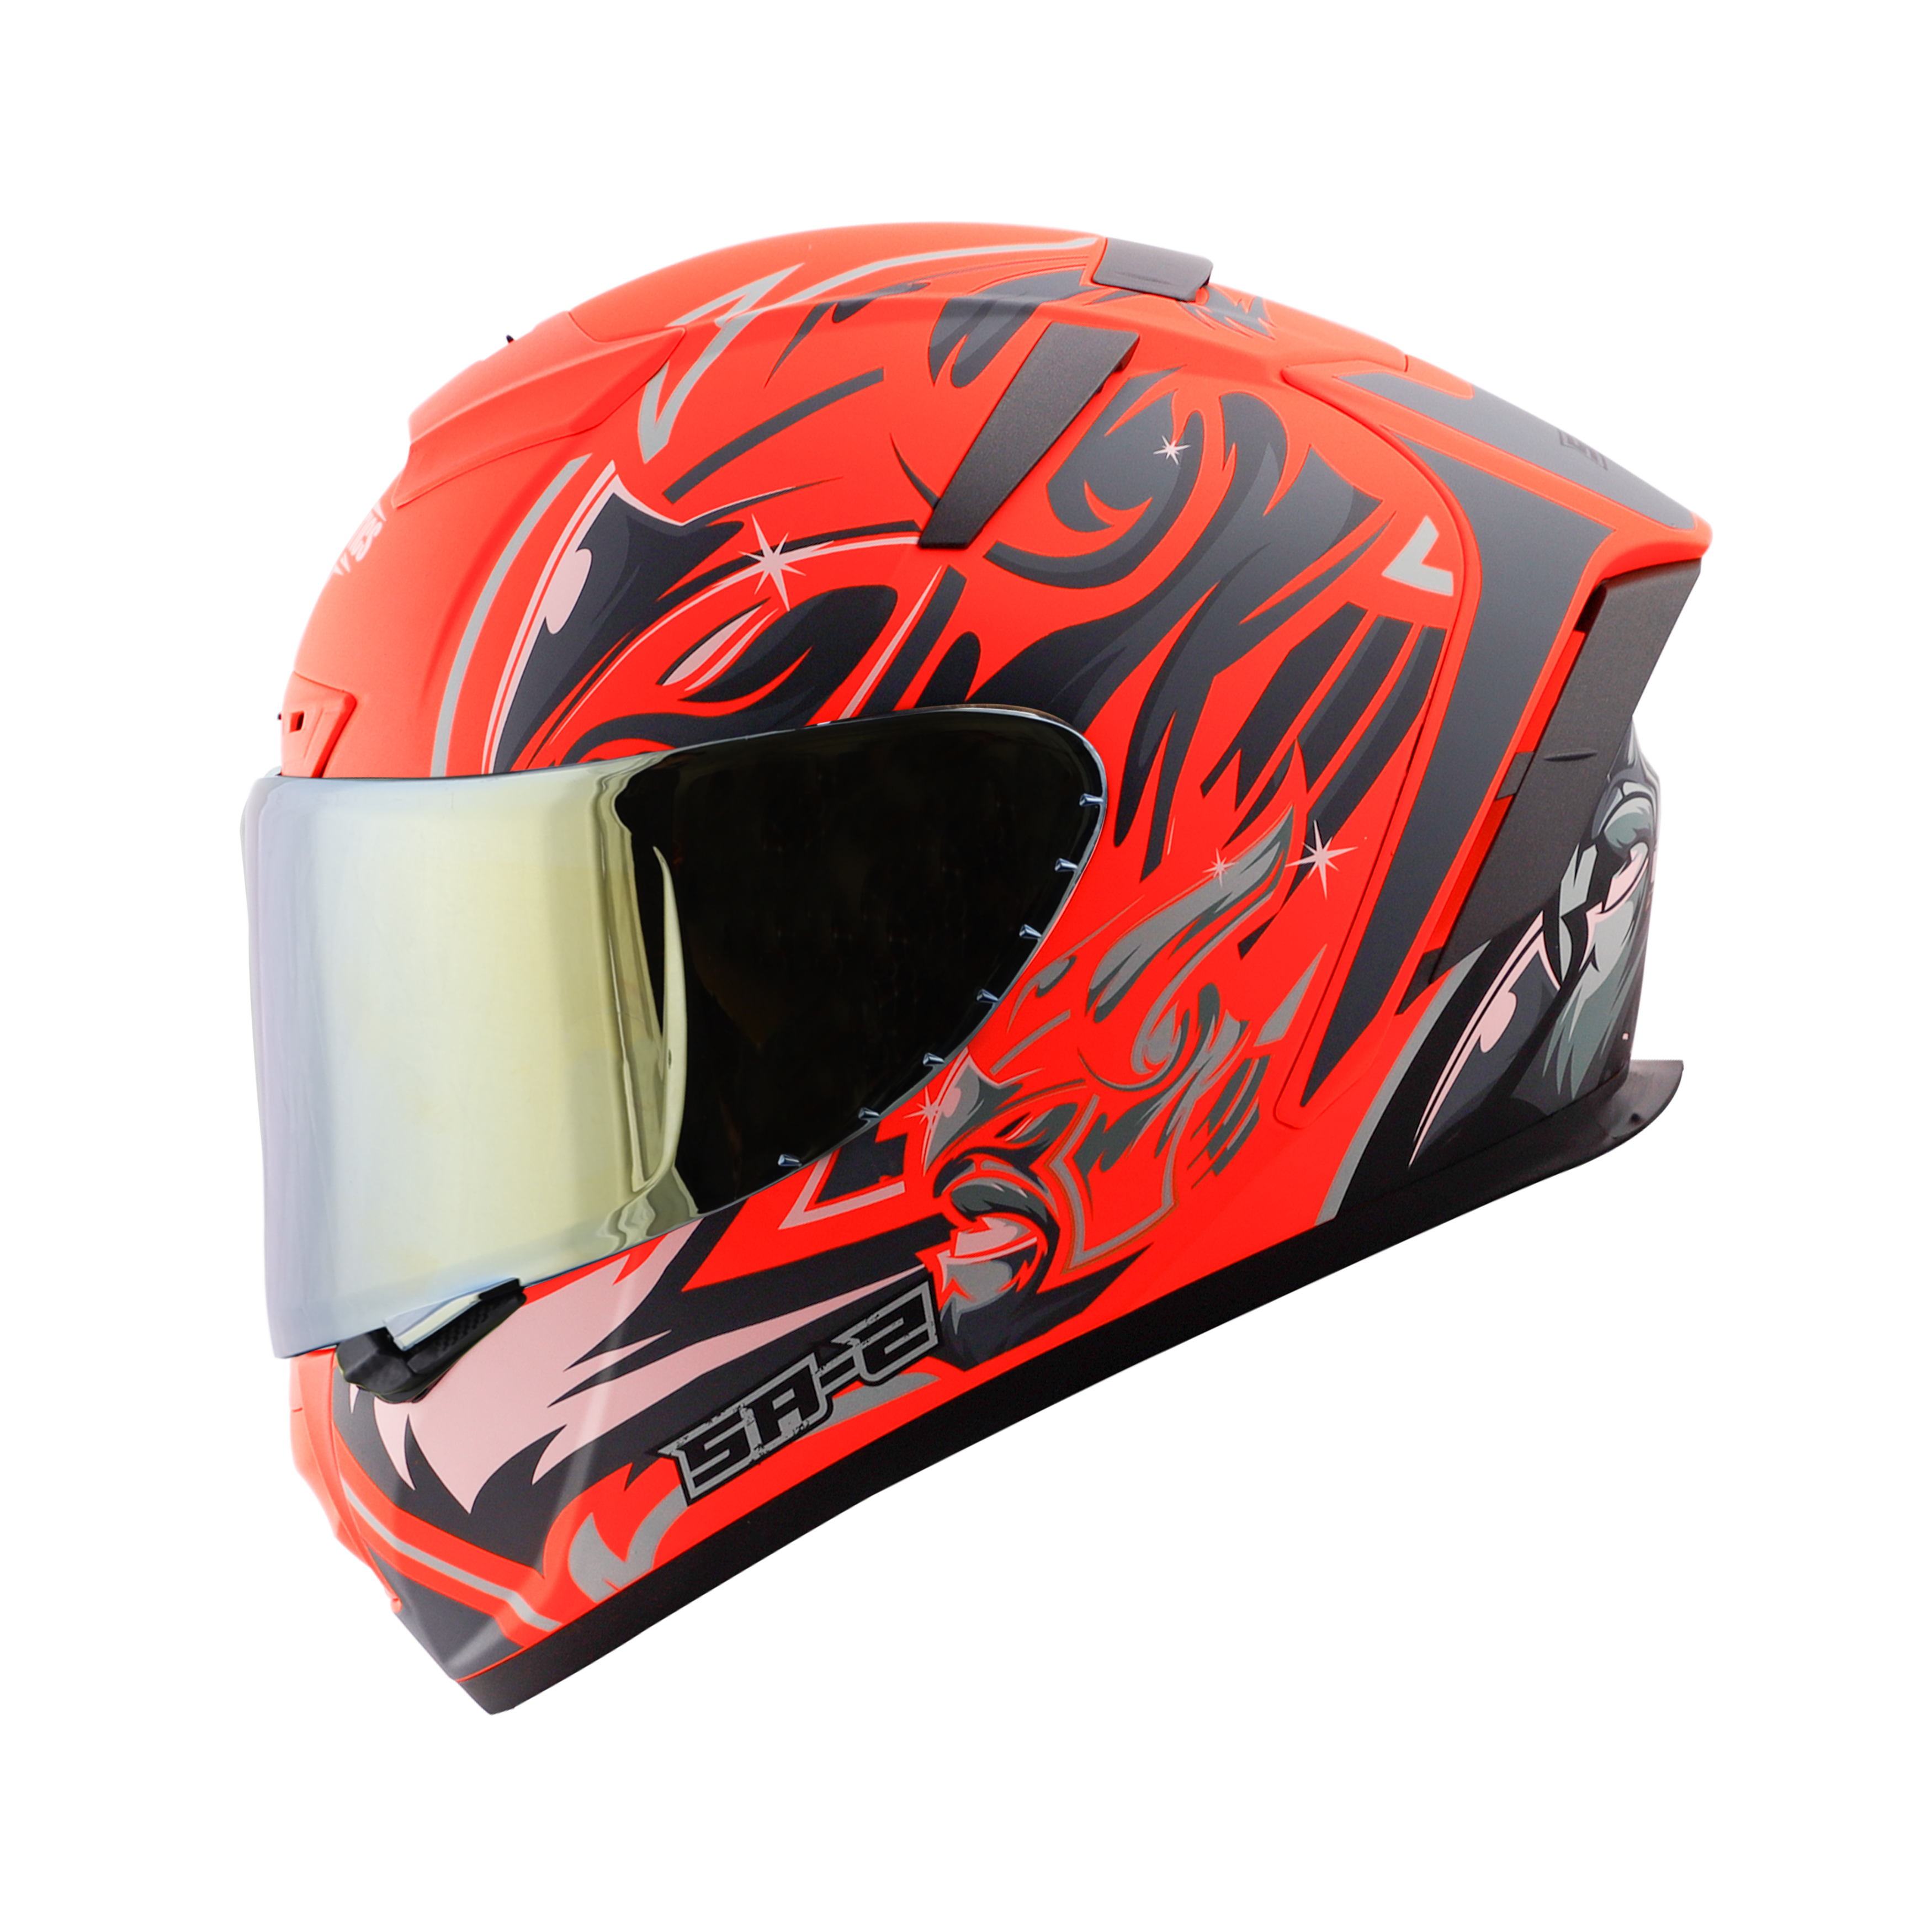 SA-2 VILLAIN GLOSSY FLUO ORANGE WITH GREY (FITTED WITH CLEAR VISOR EXTRA GOLD CHROME VISOR FREE)